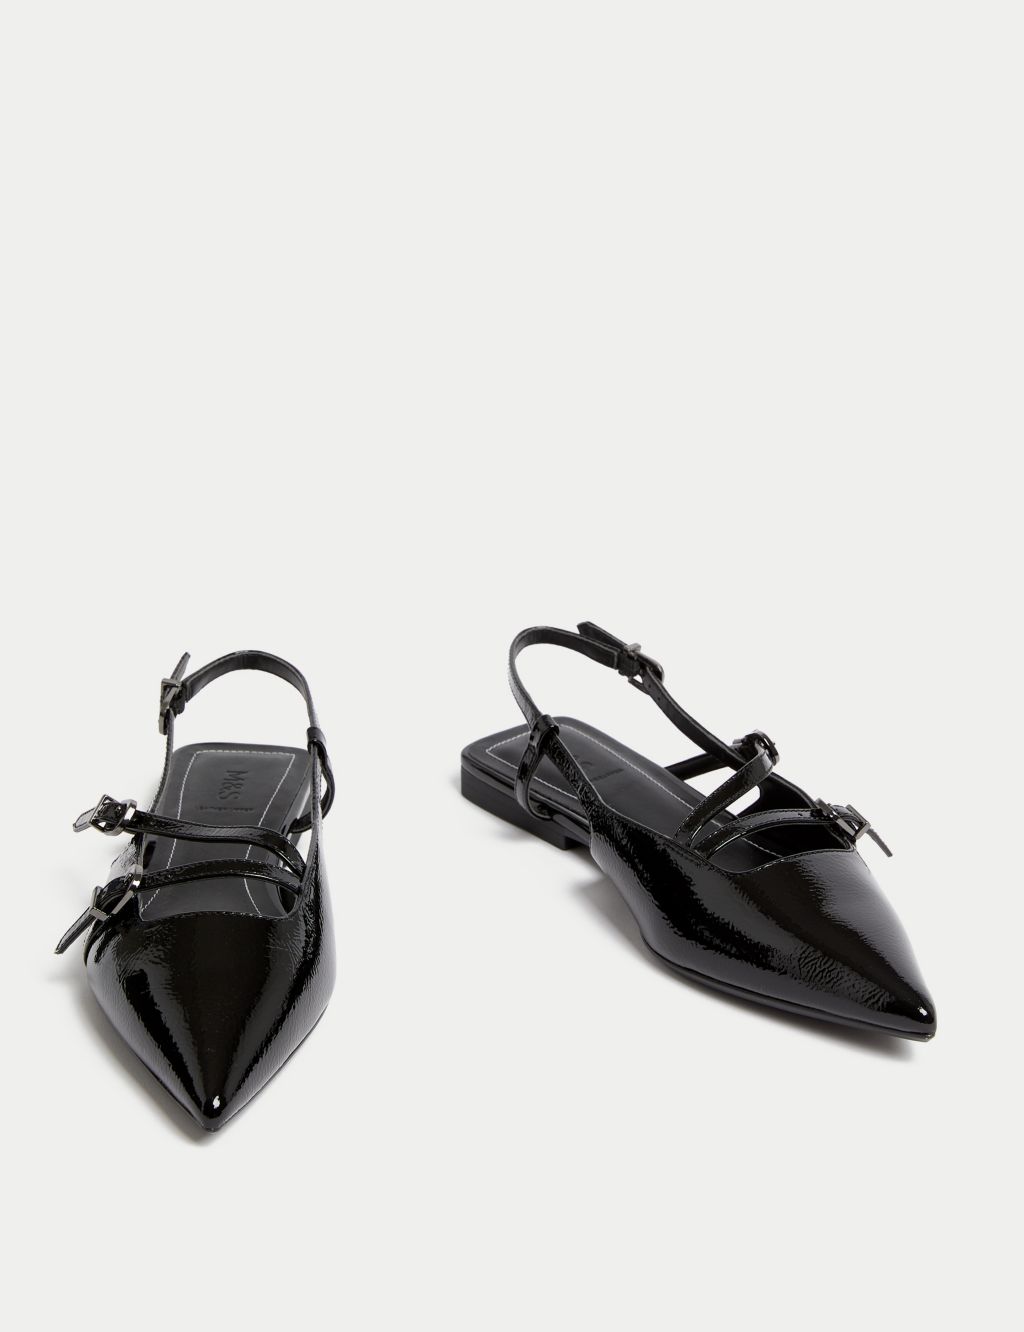 Leather Patent Buckle Flat Slingback Shoes